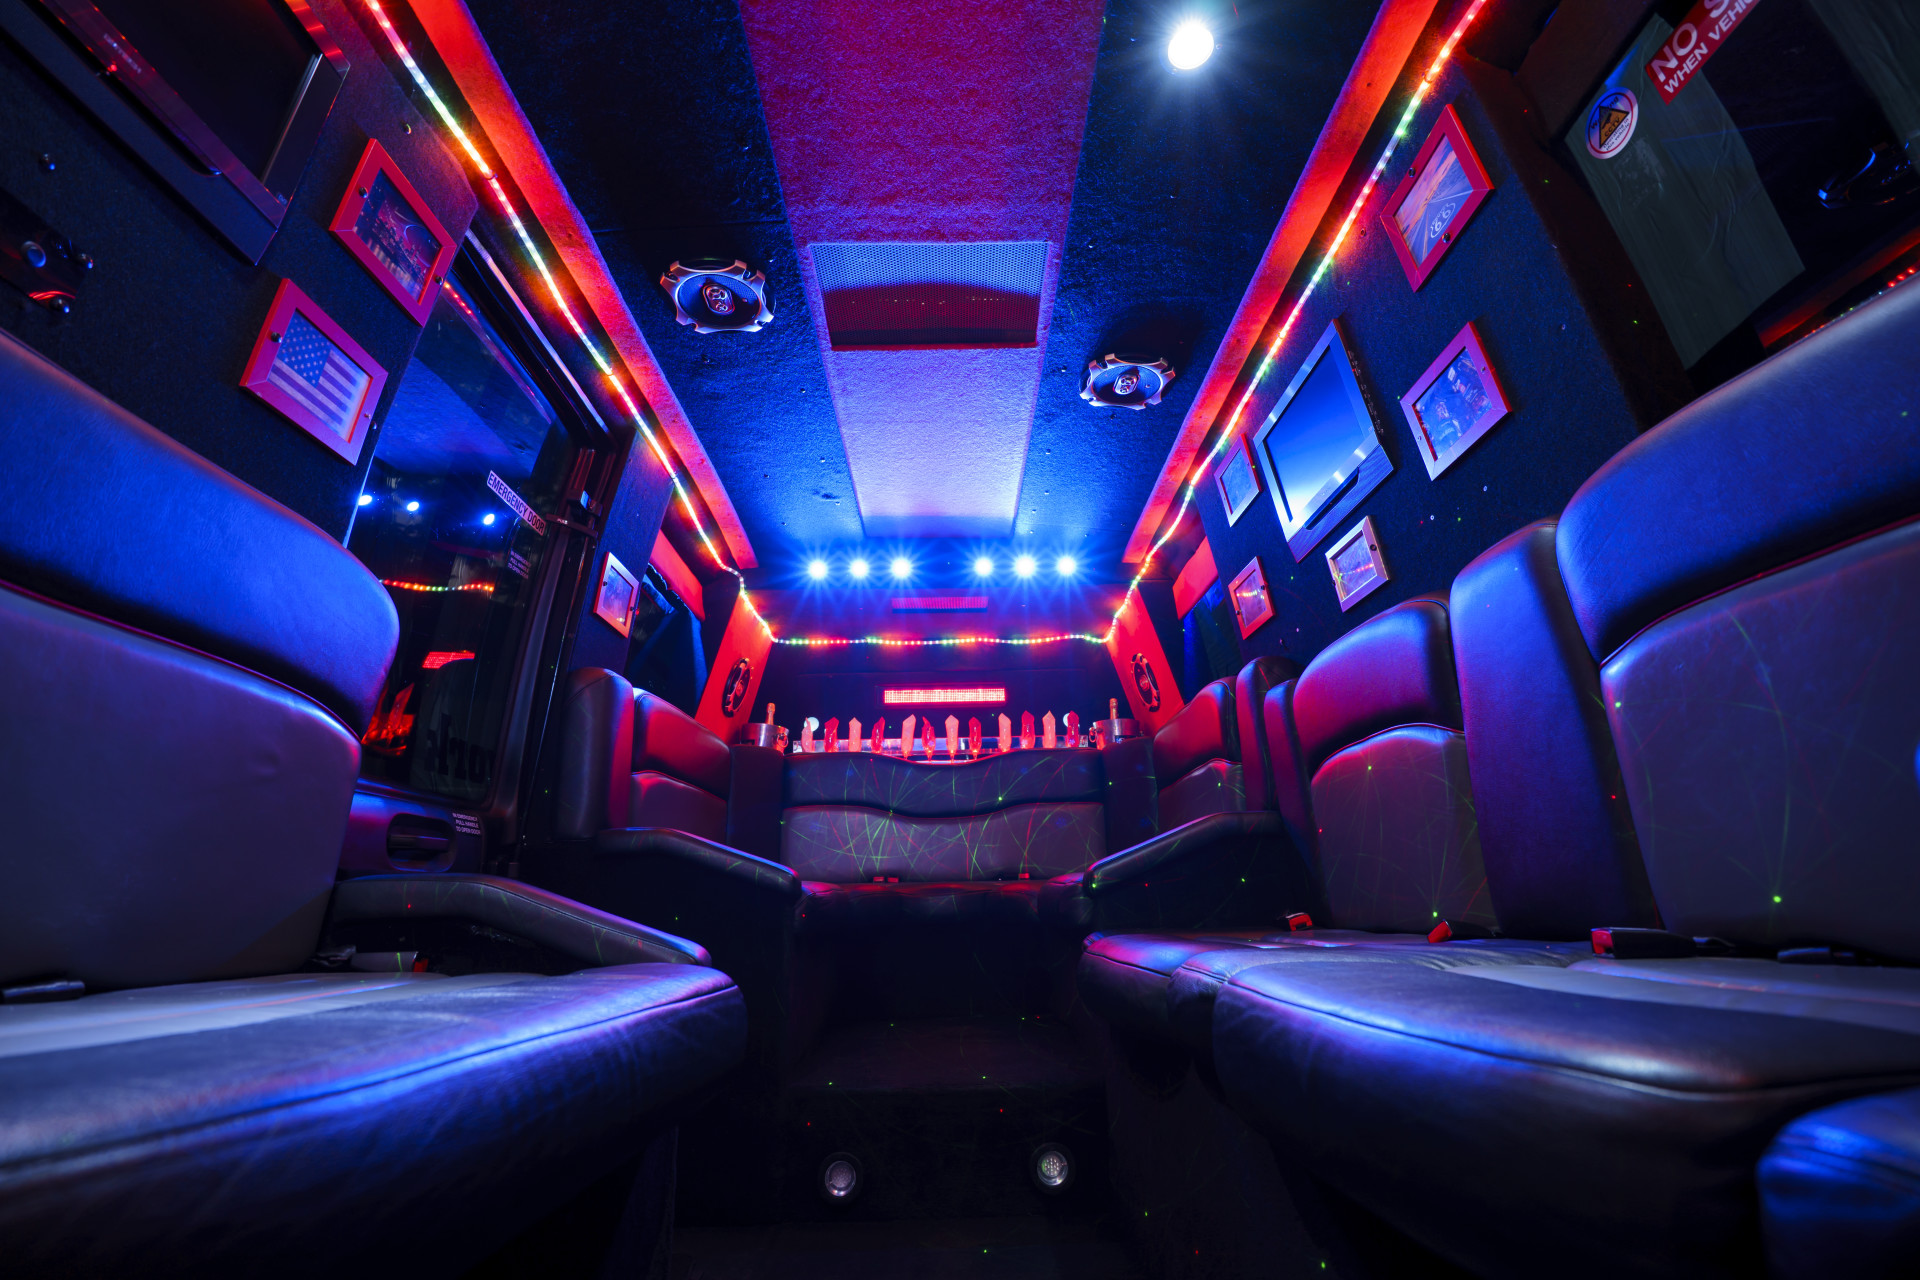 Maximising Fun on the Road: Unique Party Bus Themes for Memorable Nights Out